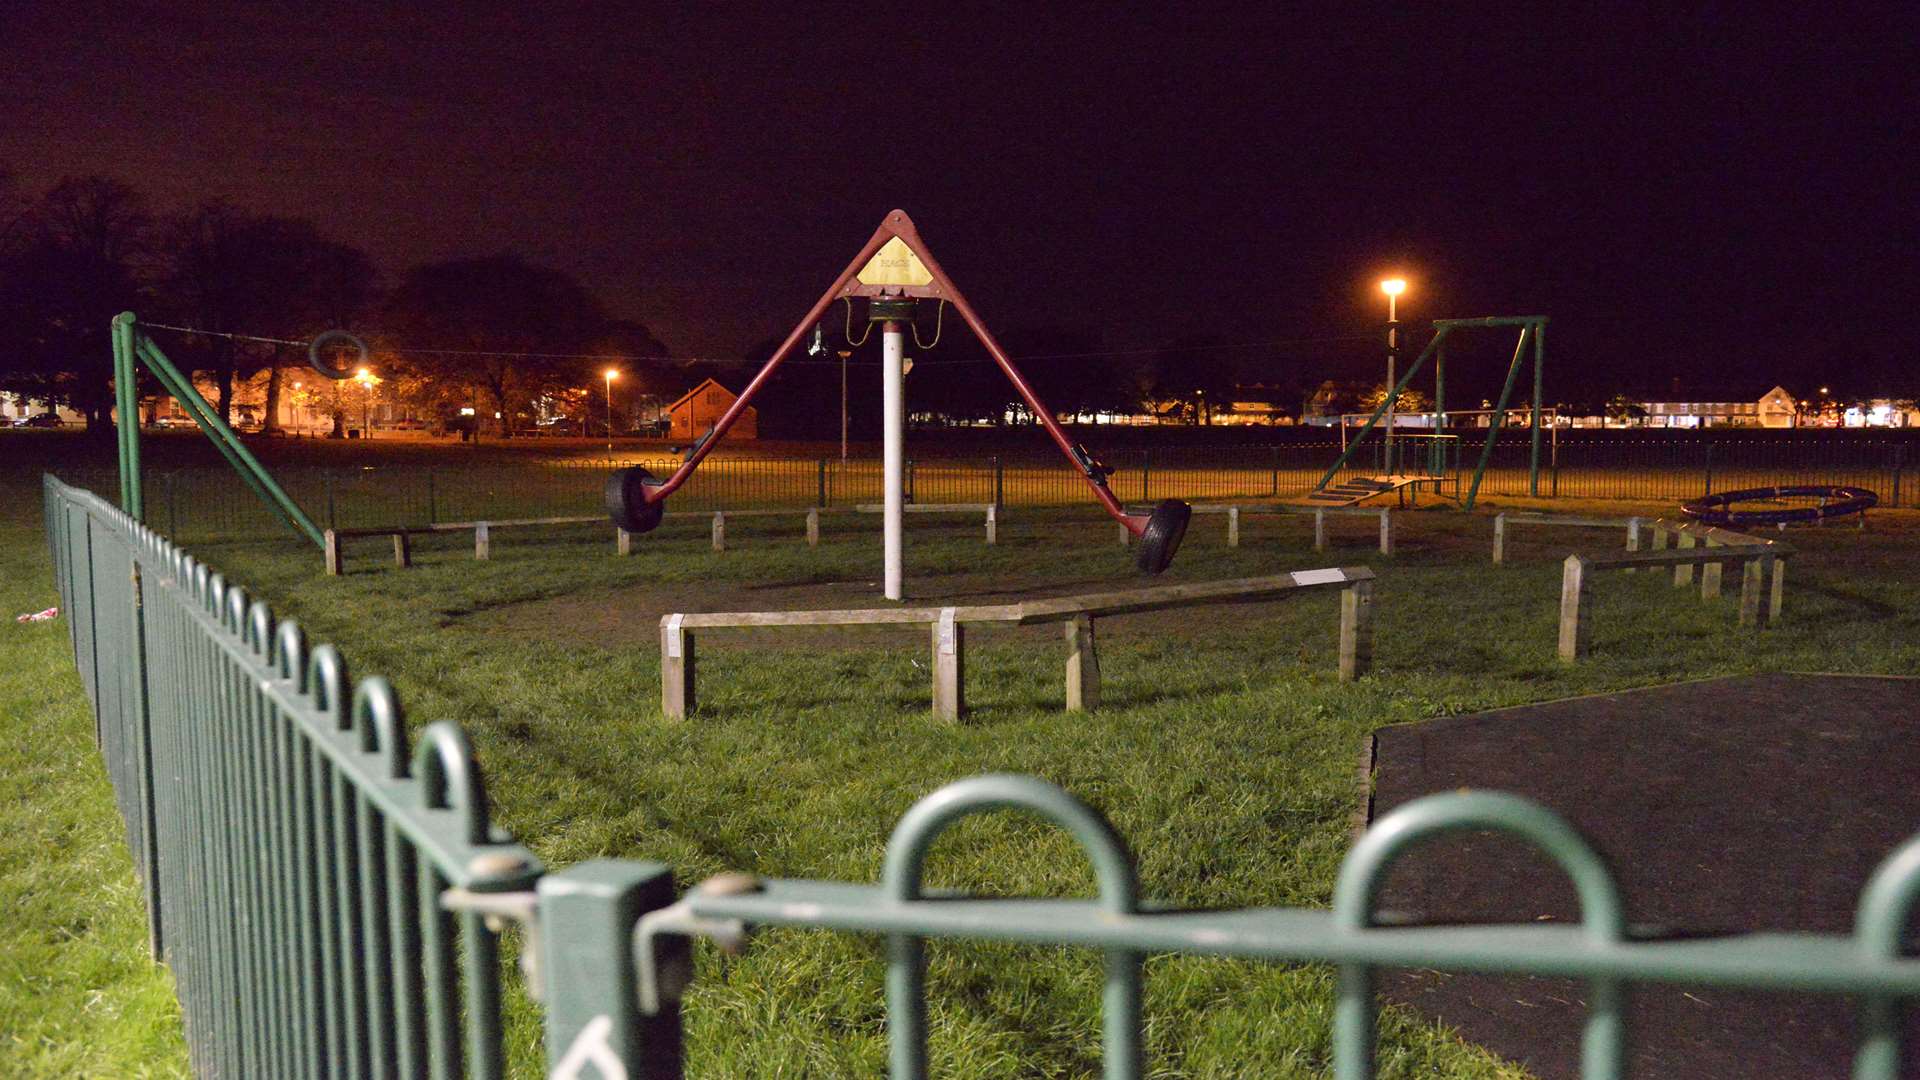 The Faversham Recreation Ground has been a meeting place for vandals and gangs.